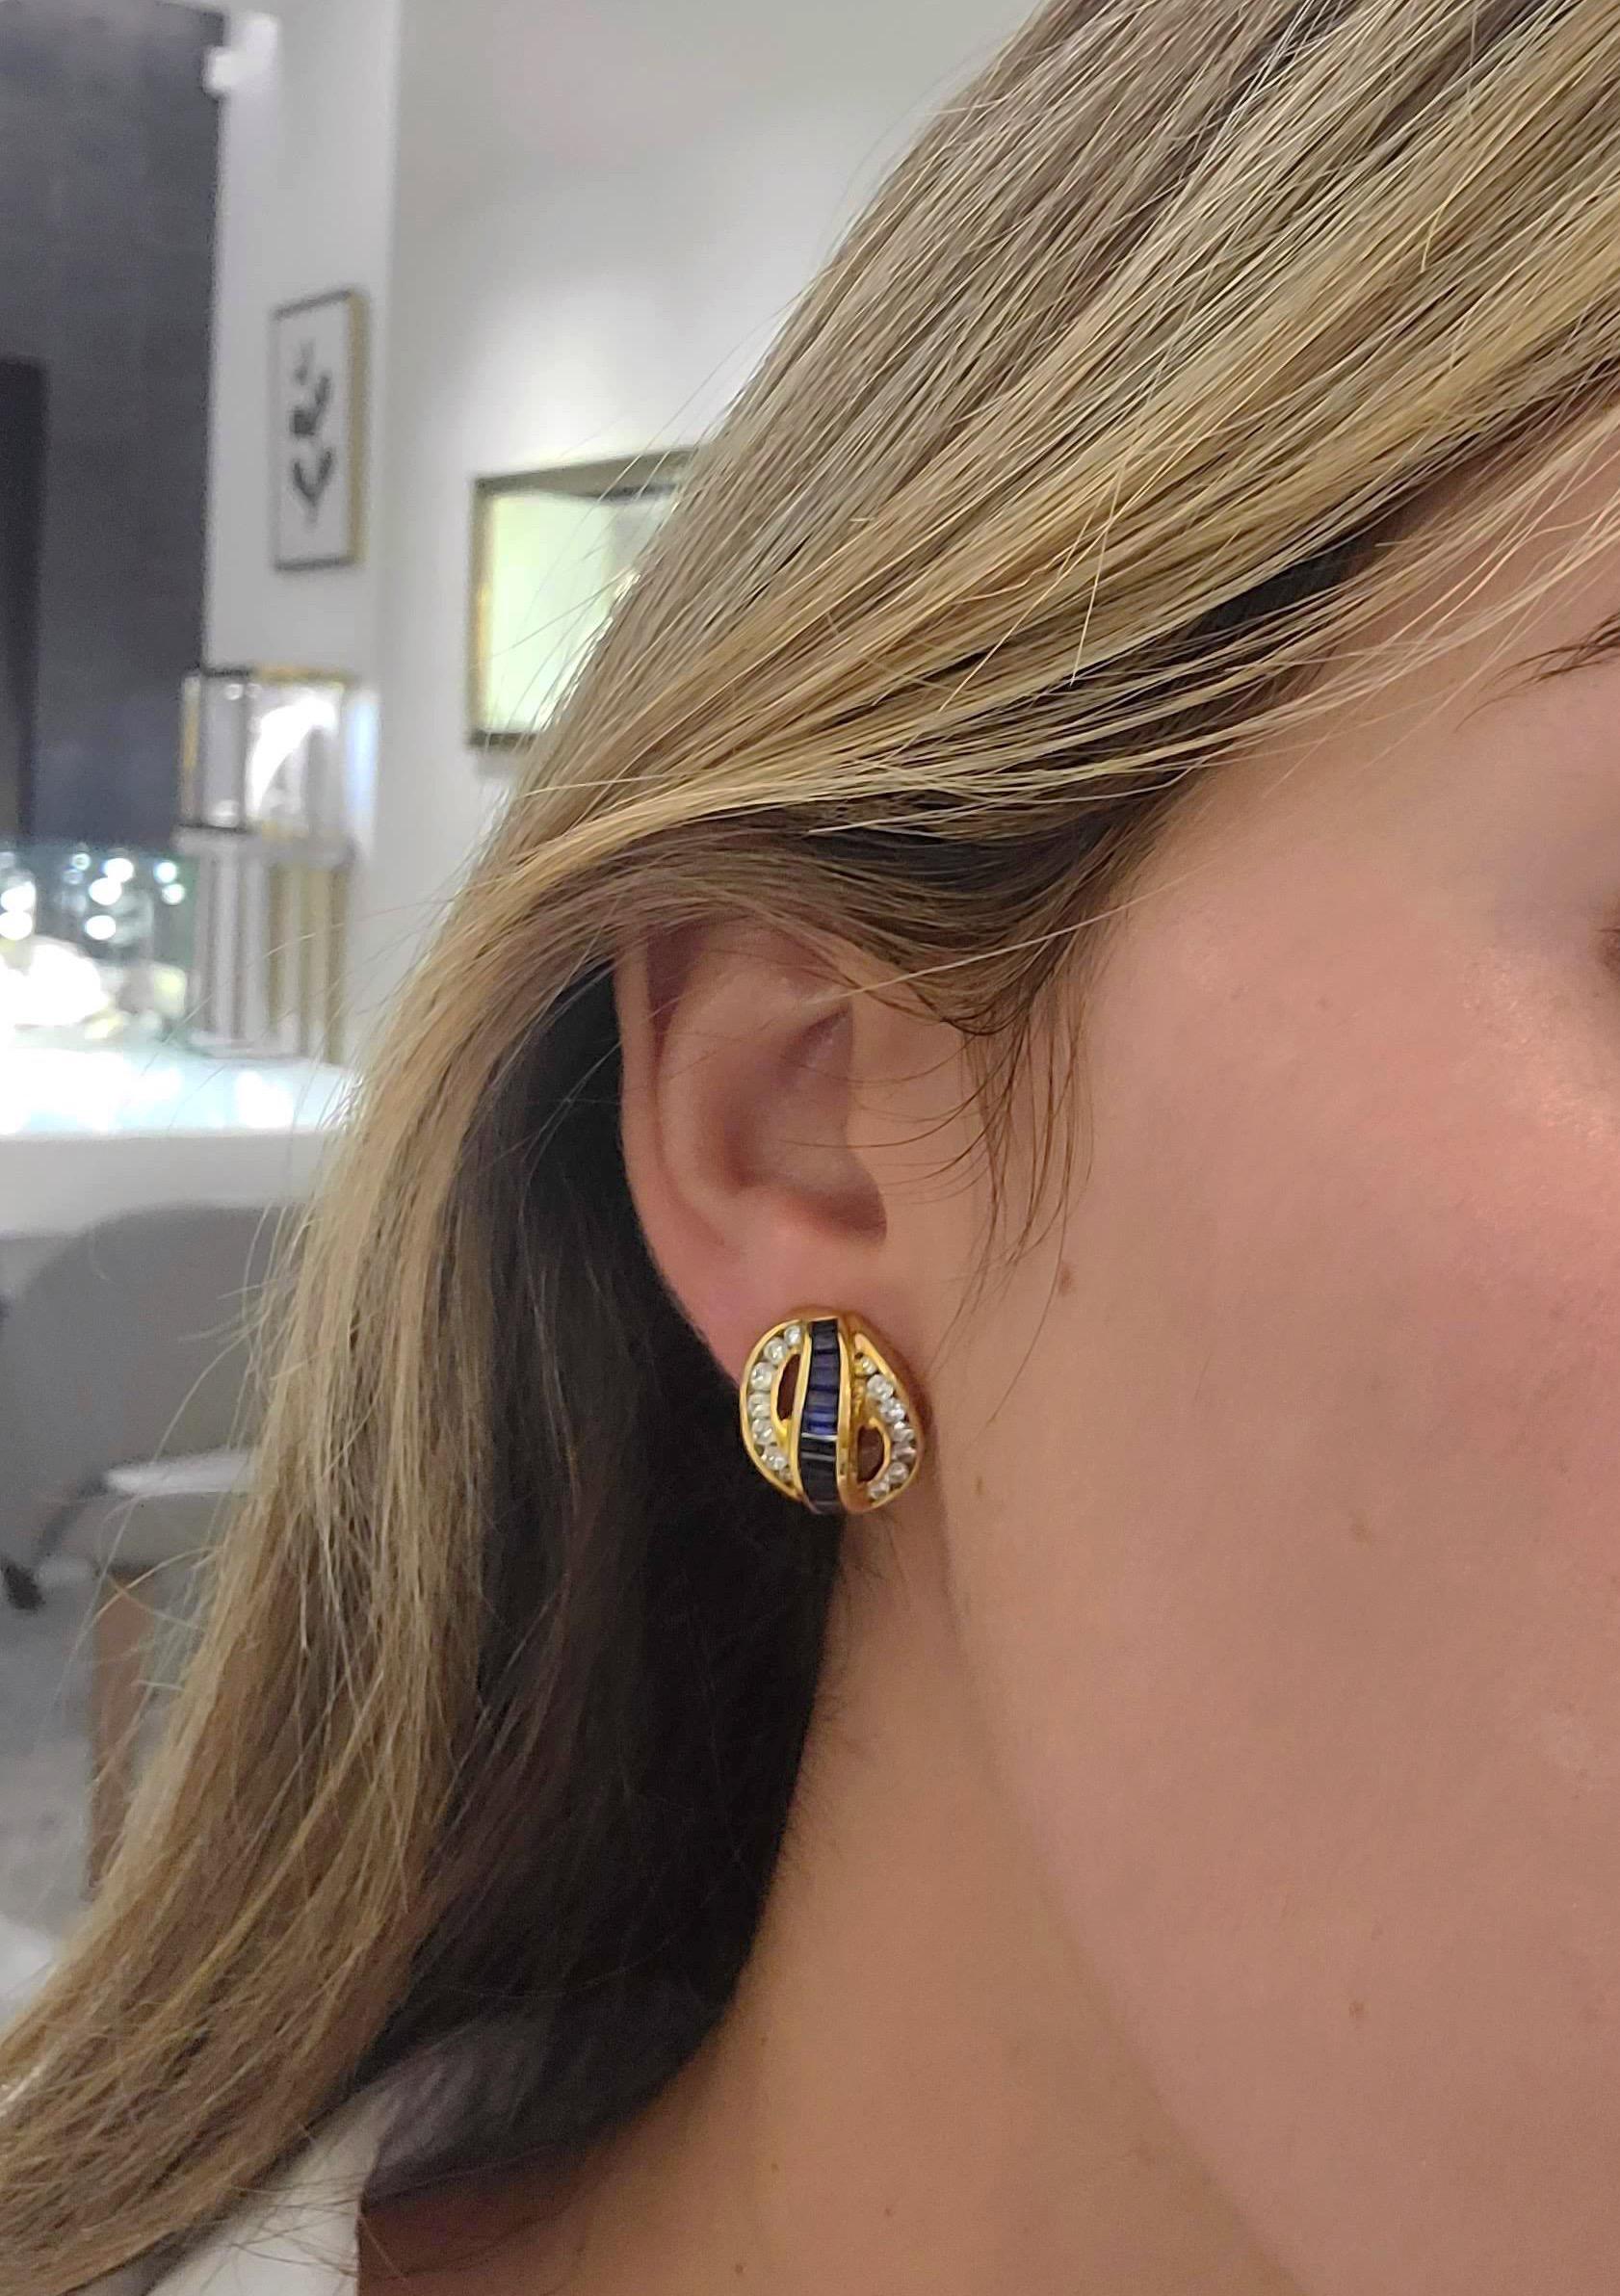 Charles Krypell Jewelry is a New York Based fine jewelry brand that became internationally known for its exquisite use of color, novel designs, and outstanding craftsmanship. 
These earrings are set with round brilliant diamonds and invisibly set